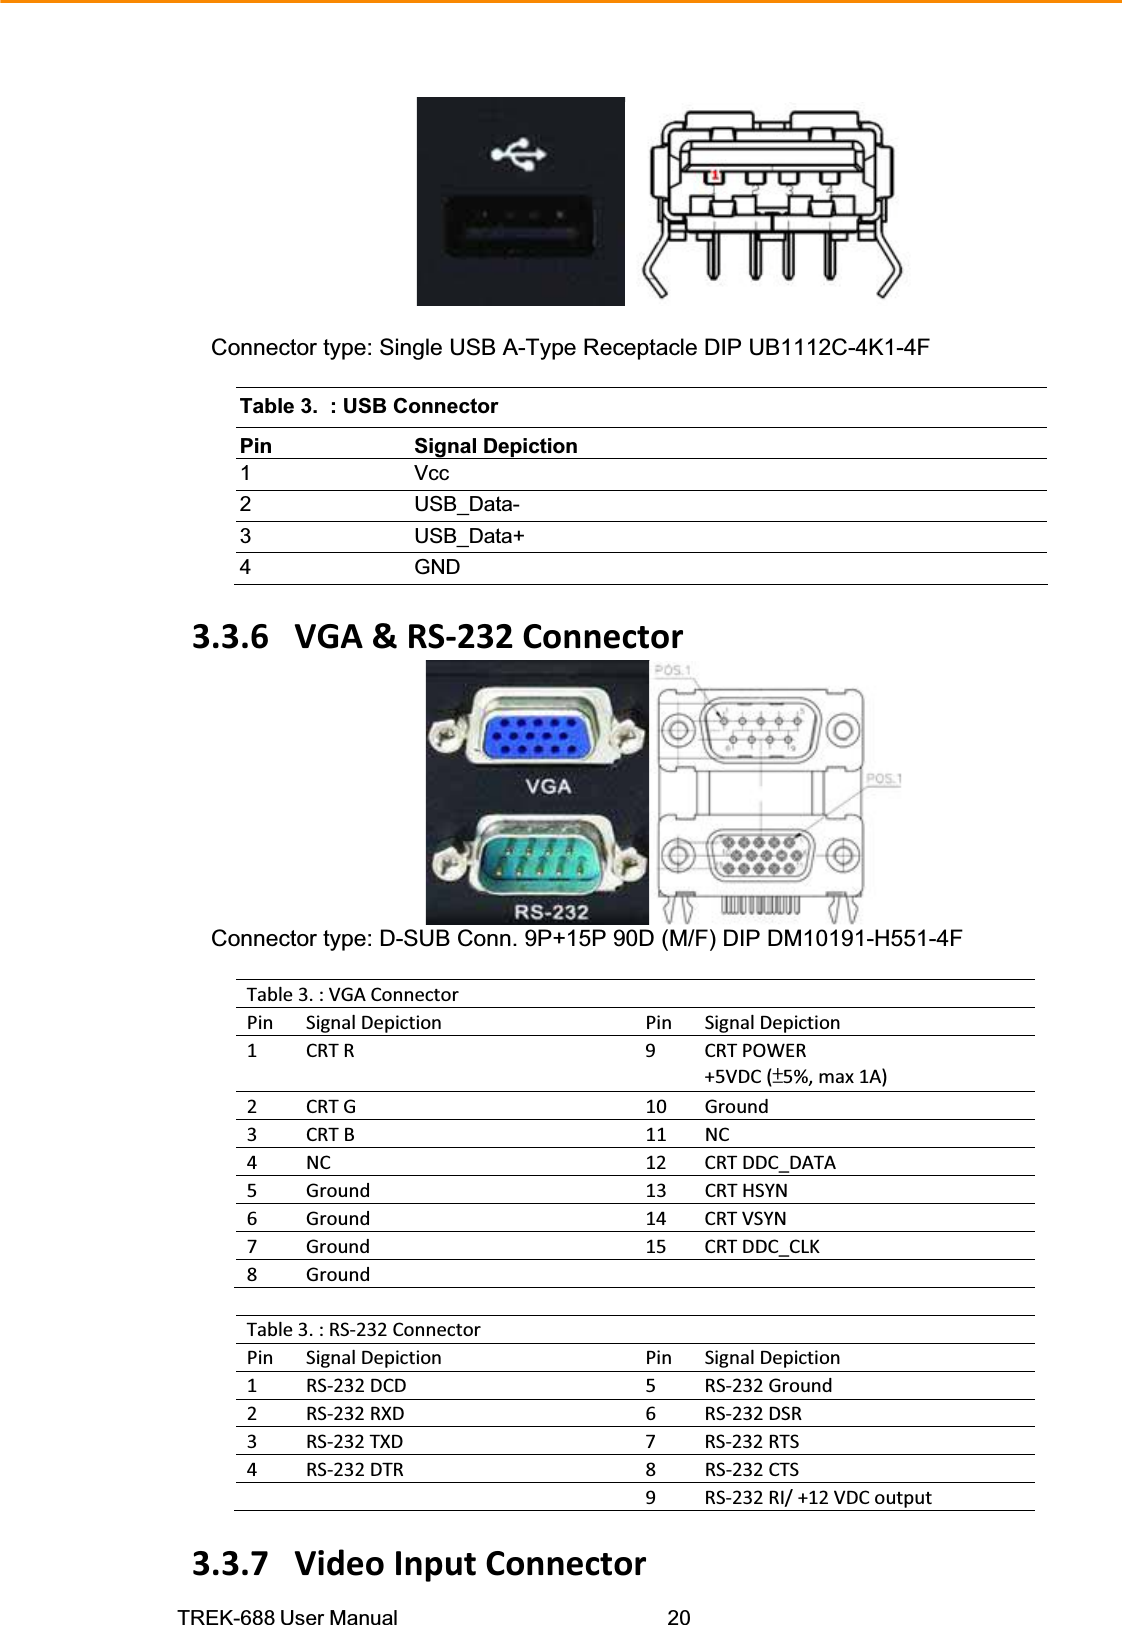 TREK-688 User Manual  20Connector type: Single USB A-Type Receptacle DIP UB1112C-4K1-4FTable 3.  : USB Connector Pin Signal Depiction 1 Vcc 2 USB_Data- 3 USB_Data+ 4 GND 3.3.6VGA&amp;RSͲ232ConnectorConnector type: D-SUB Conn. 9P+15P 90D (M/F) DIP DM10191-H551-4FTable3.:VGAConnectorPin SignalDepiction Pin SignalDepiction1 CRTR 9 CRTPOWER+5VDC(̈́5%,max1A)2 CRTG 10 Ground3 CRTB 11 NC4 NC 12 CRTDDC_DATA5 Ground 13 CRTHSYN6 Ground 14 CRTVSYN7 Ground 15 CRTDDC_CLK8 Ground  Table3.:RSͲ232ConnectorPin SignalDepiction Pin SignalDepiction1 RSͲ232DCD 5 RSͲ232Ground2 RSͲ232RXD 6 RSͲ232DSR3 RSͲ232TXD 7 RSͲ232RTS4 RSͲ232DTR 8 RSͲ232CTS  9 RSͲ232RI/+12VDCoutput3.3.7VideoInputConnector